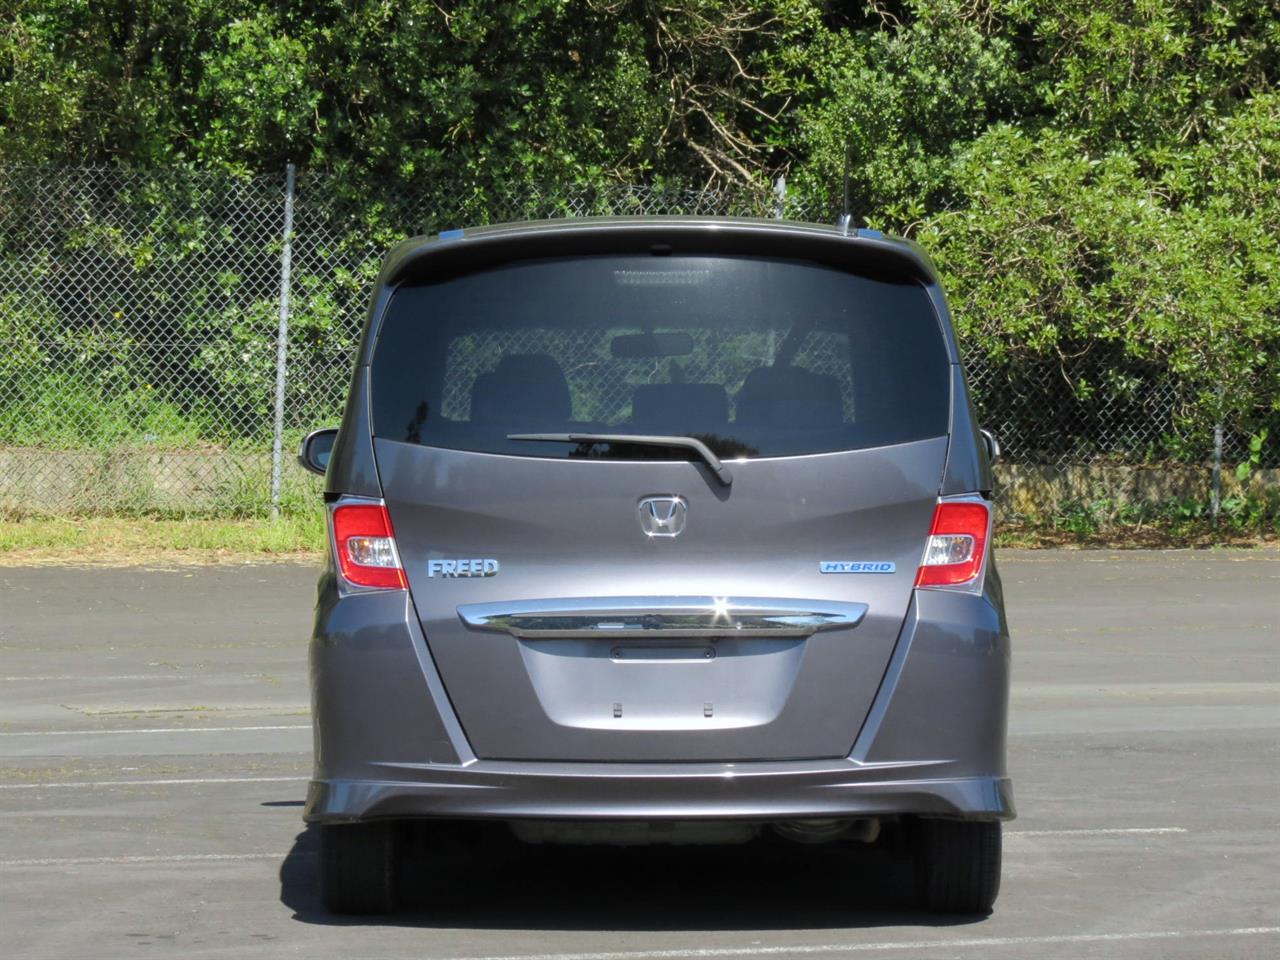 2014 Honda Freed only $48 weekly